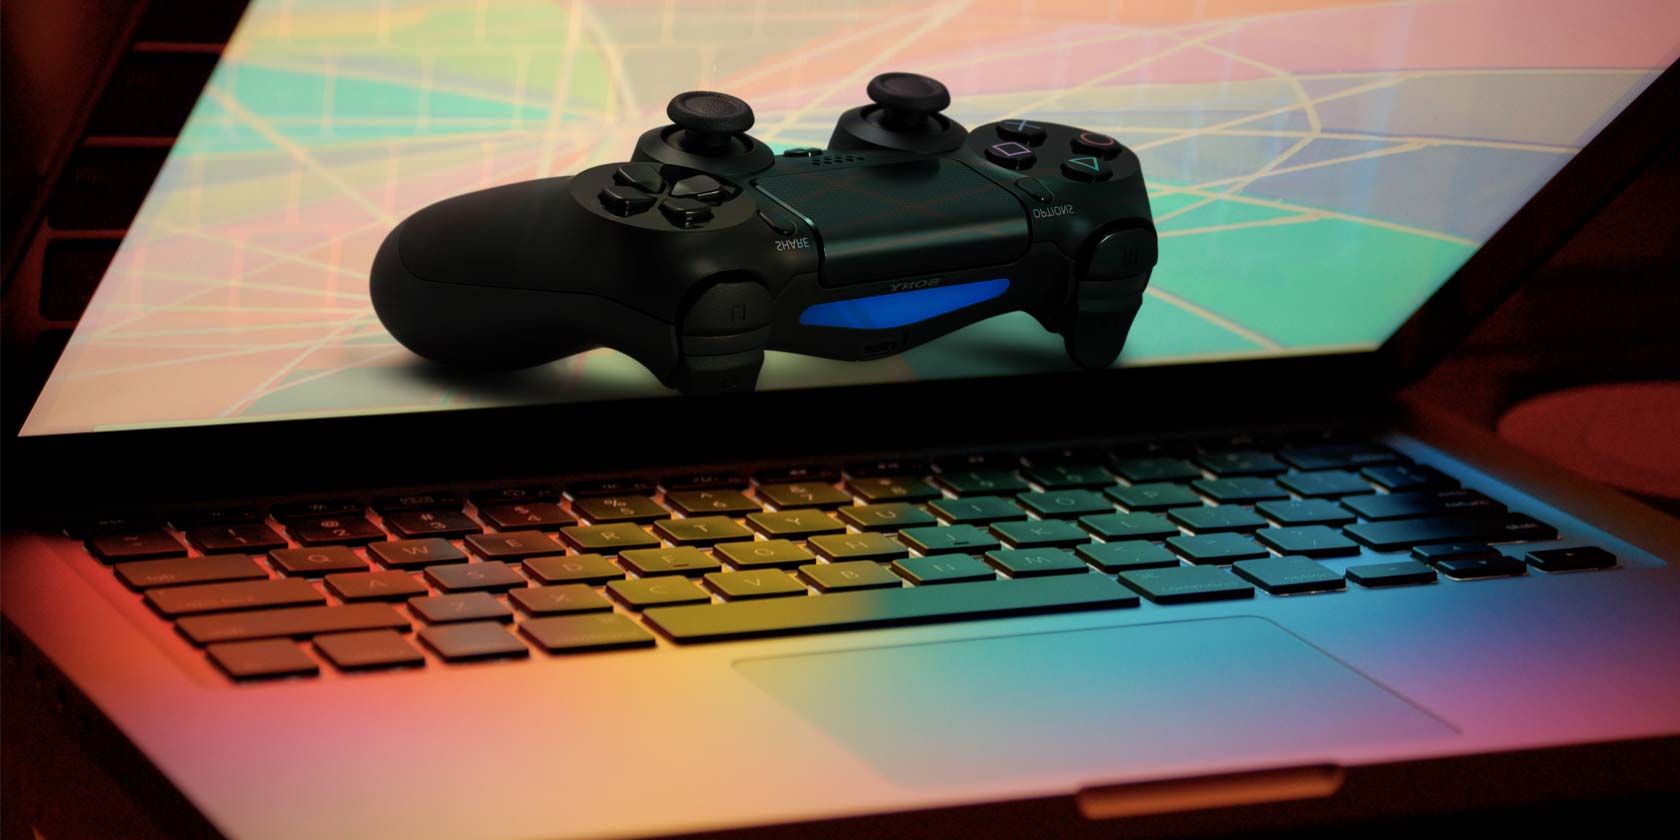 How to Use the PS4 Controller on Your Mac or PC